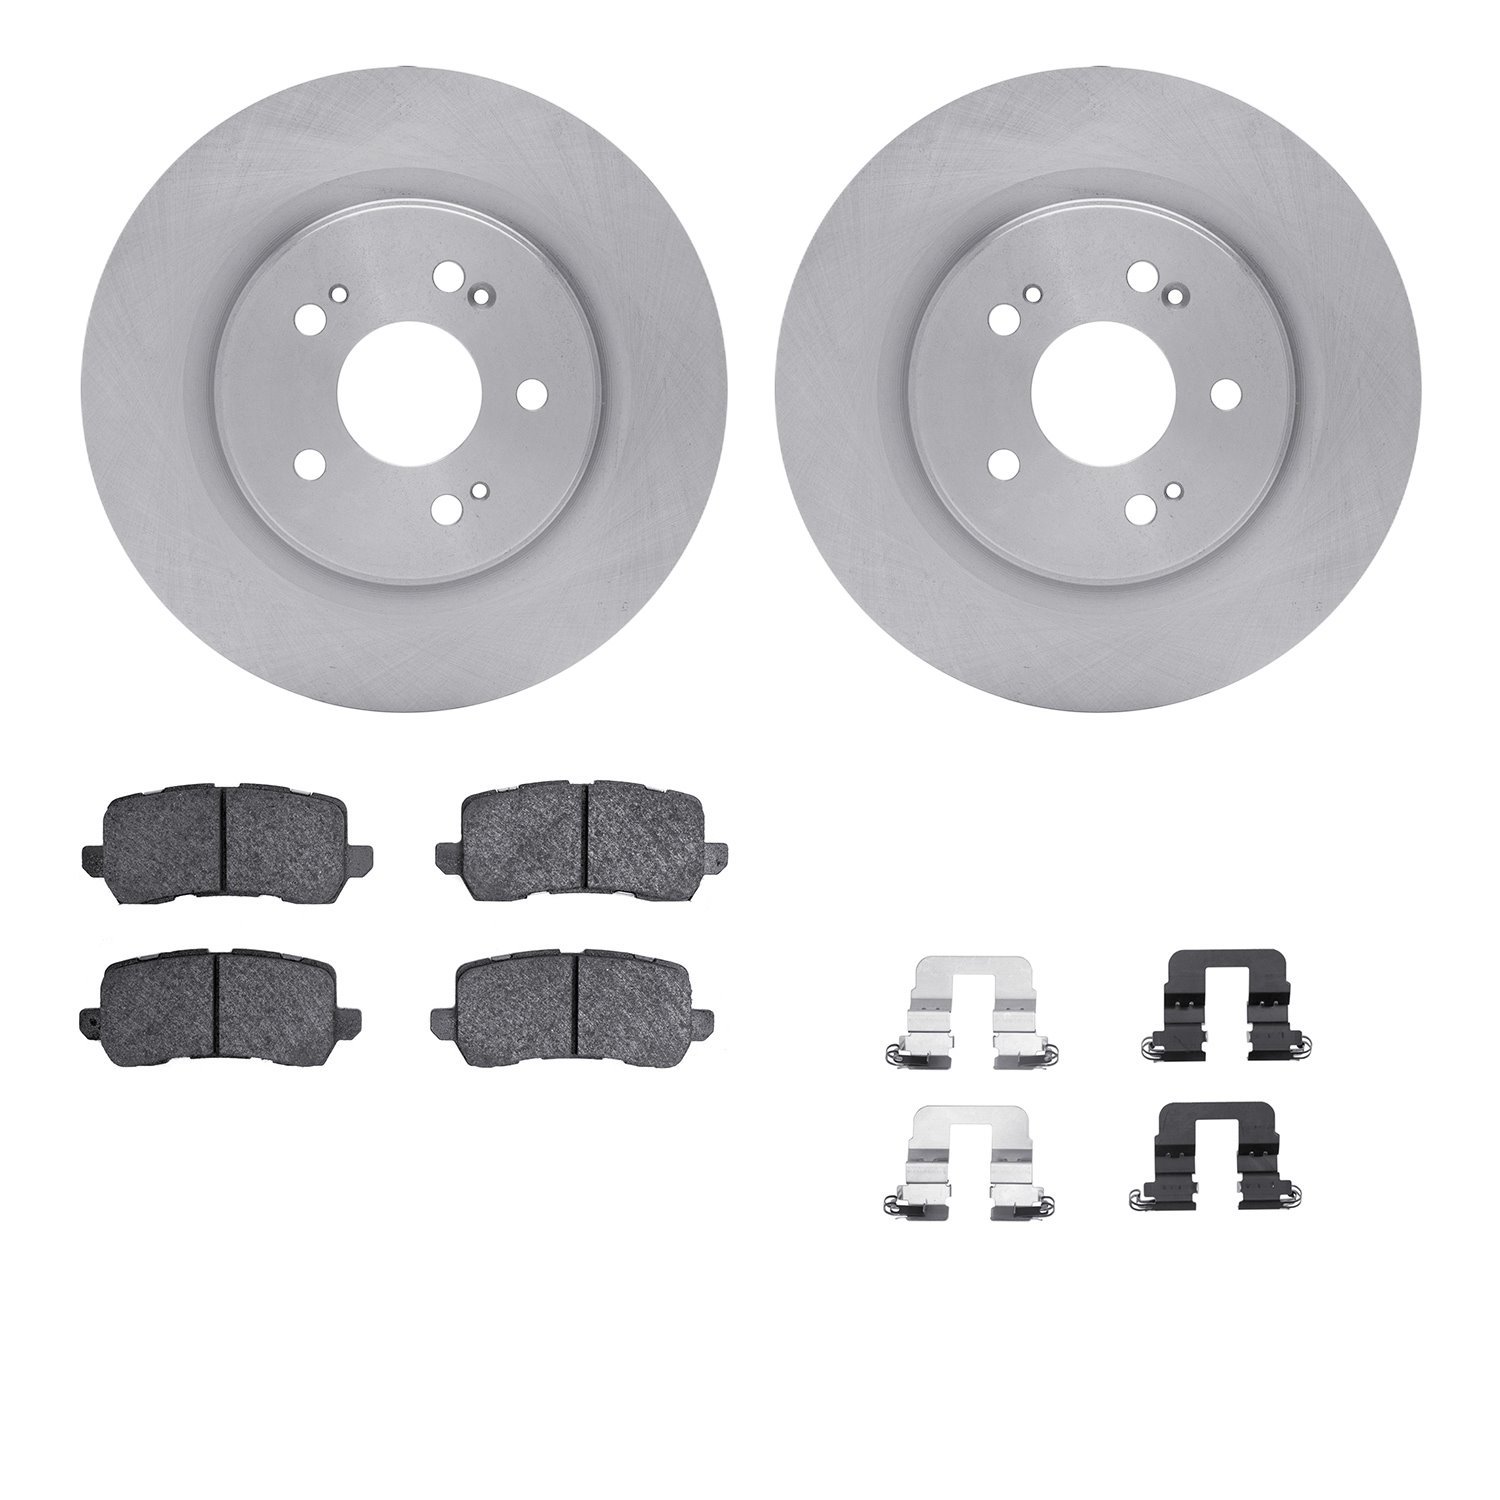 6312-59099 Brake Rotors with 3000-Series Ceramic Brake Pads Kit with Hardware, Fits Select Acura/Honda, Position: Rear